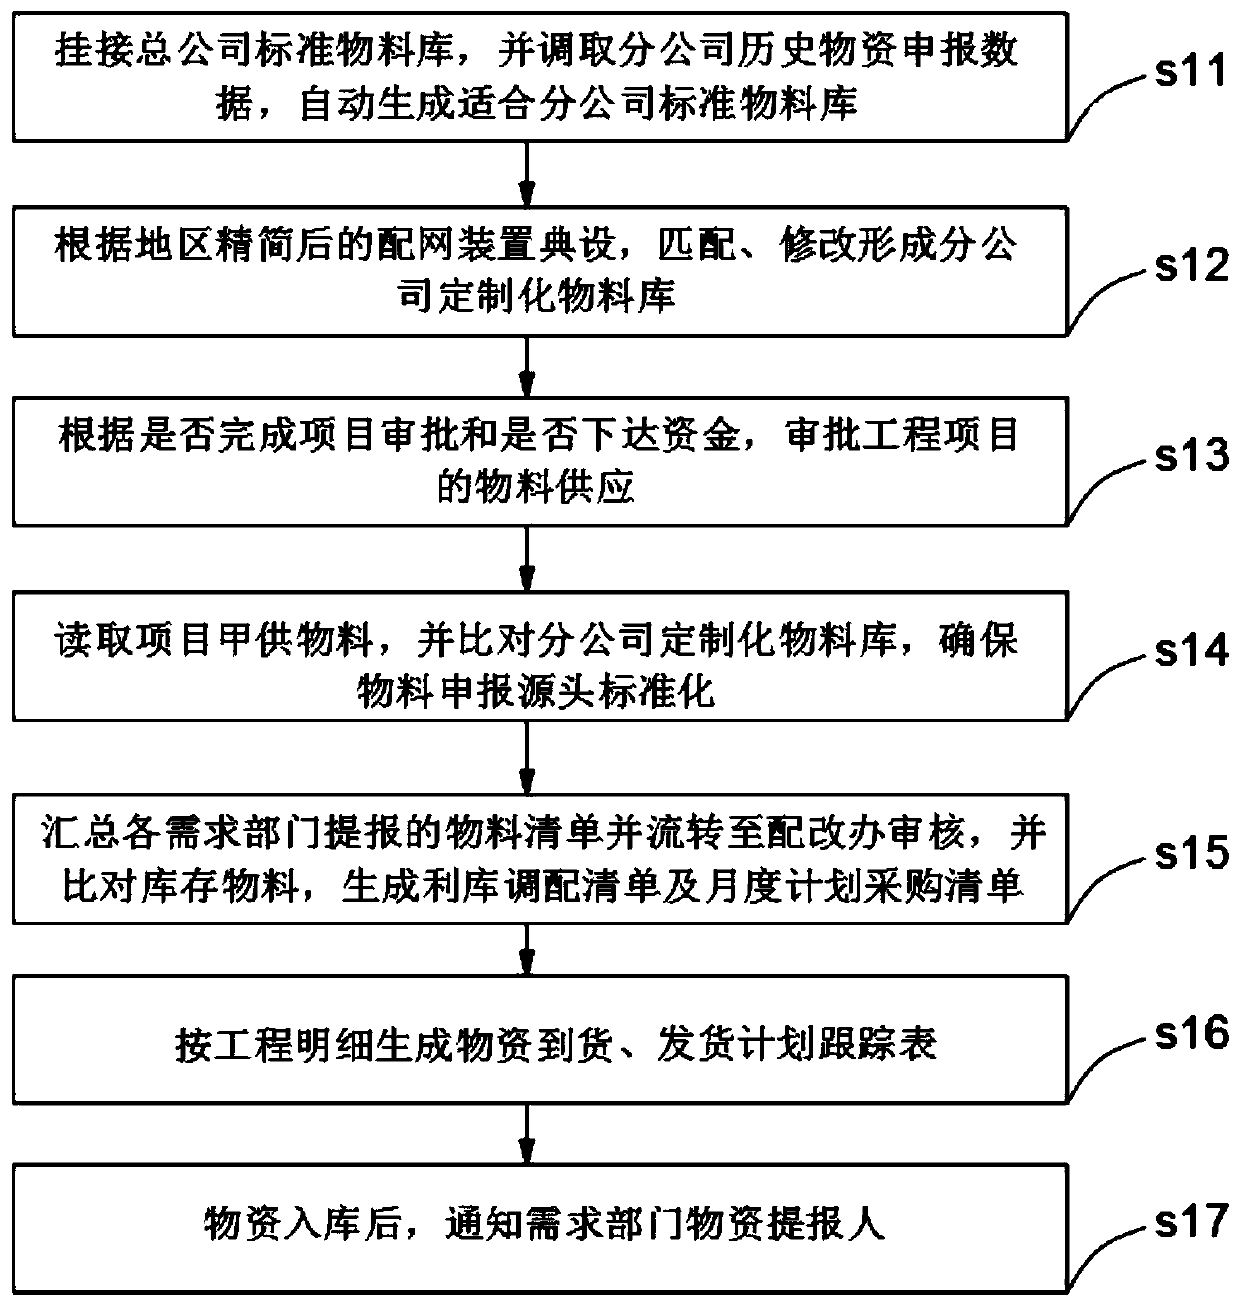 A distribution network material plan management method and system